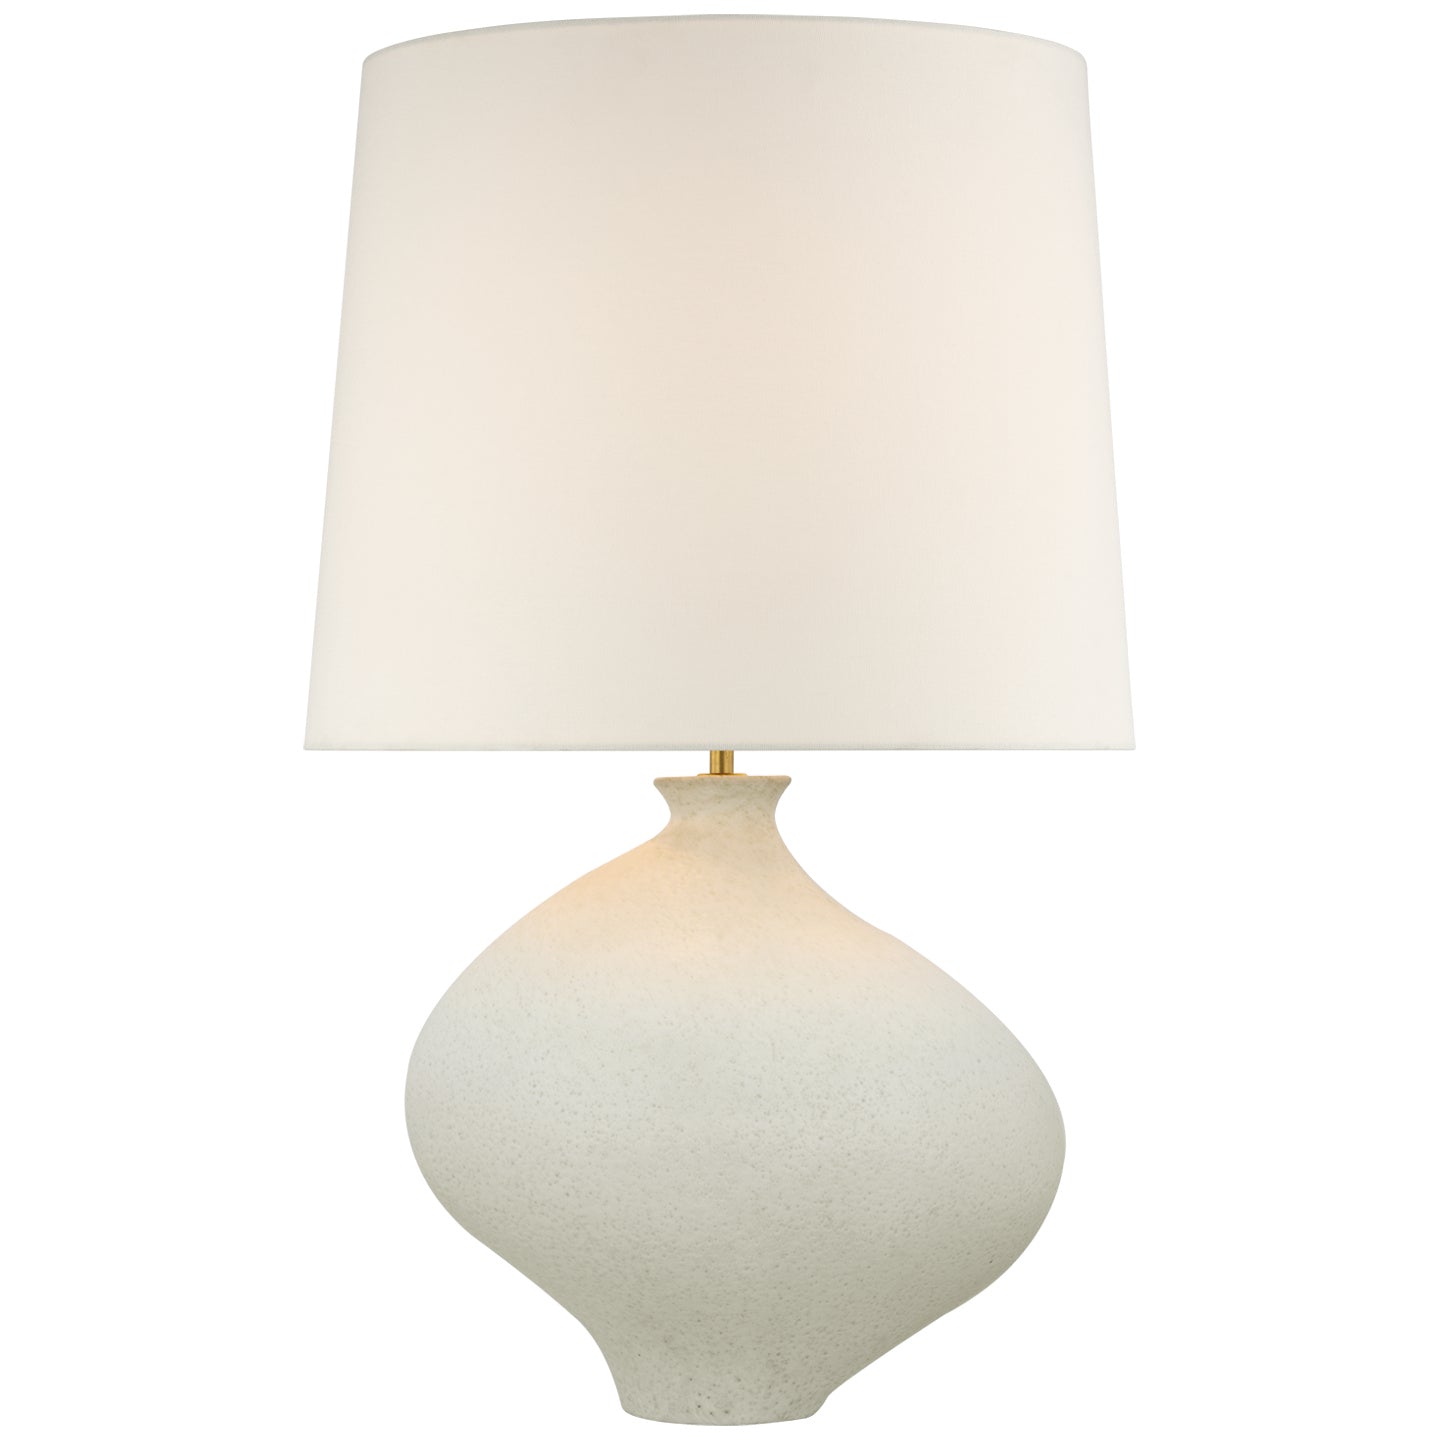 Load image into Gallery viewer, Visual Comfort Signature - ARN 3651MWT-L - LED Table Lamp - Celia - Marion White
